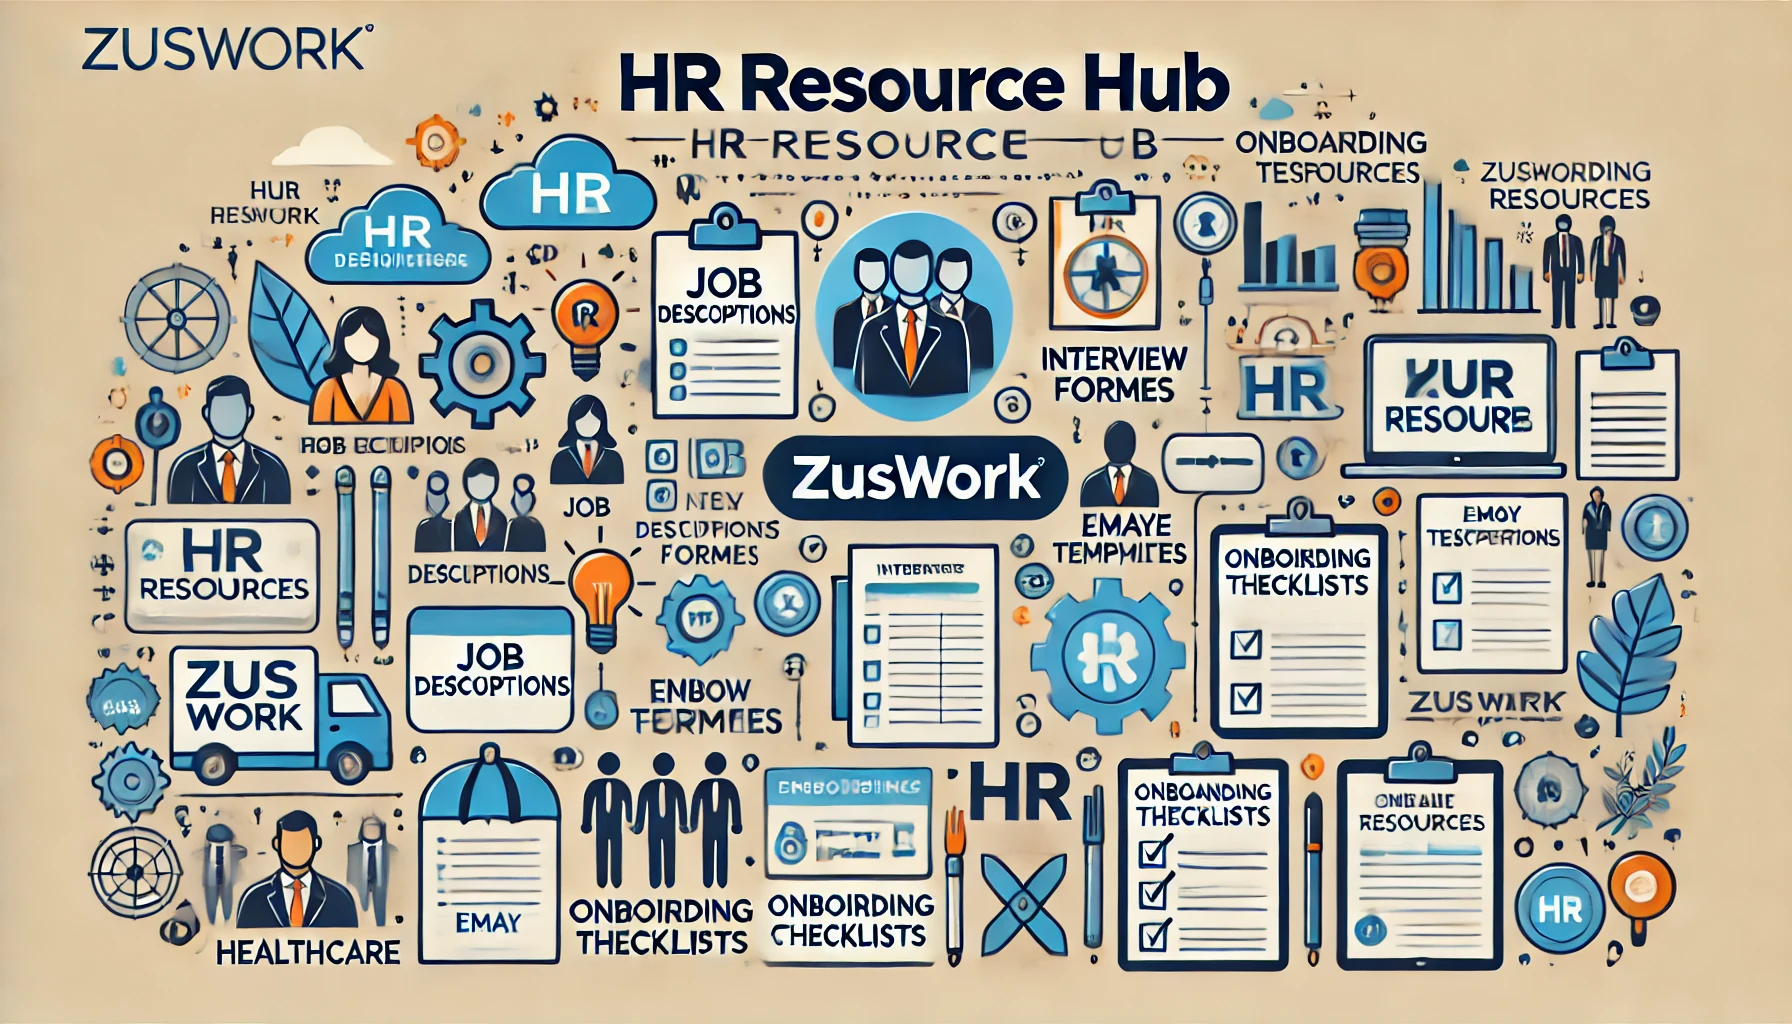 Zuswork HR resource hub. Find templates,surveys and more to download